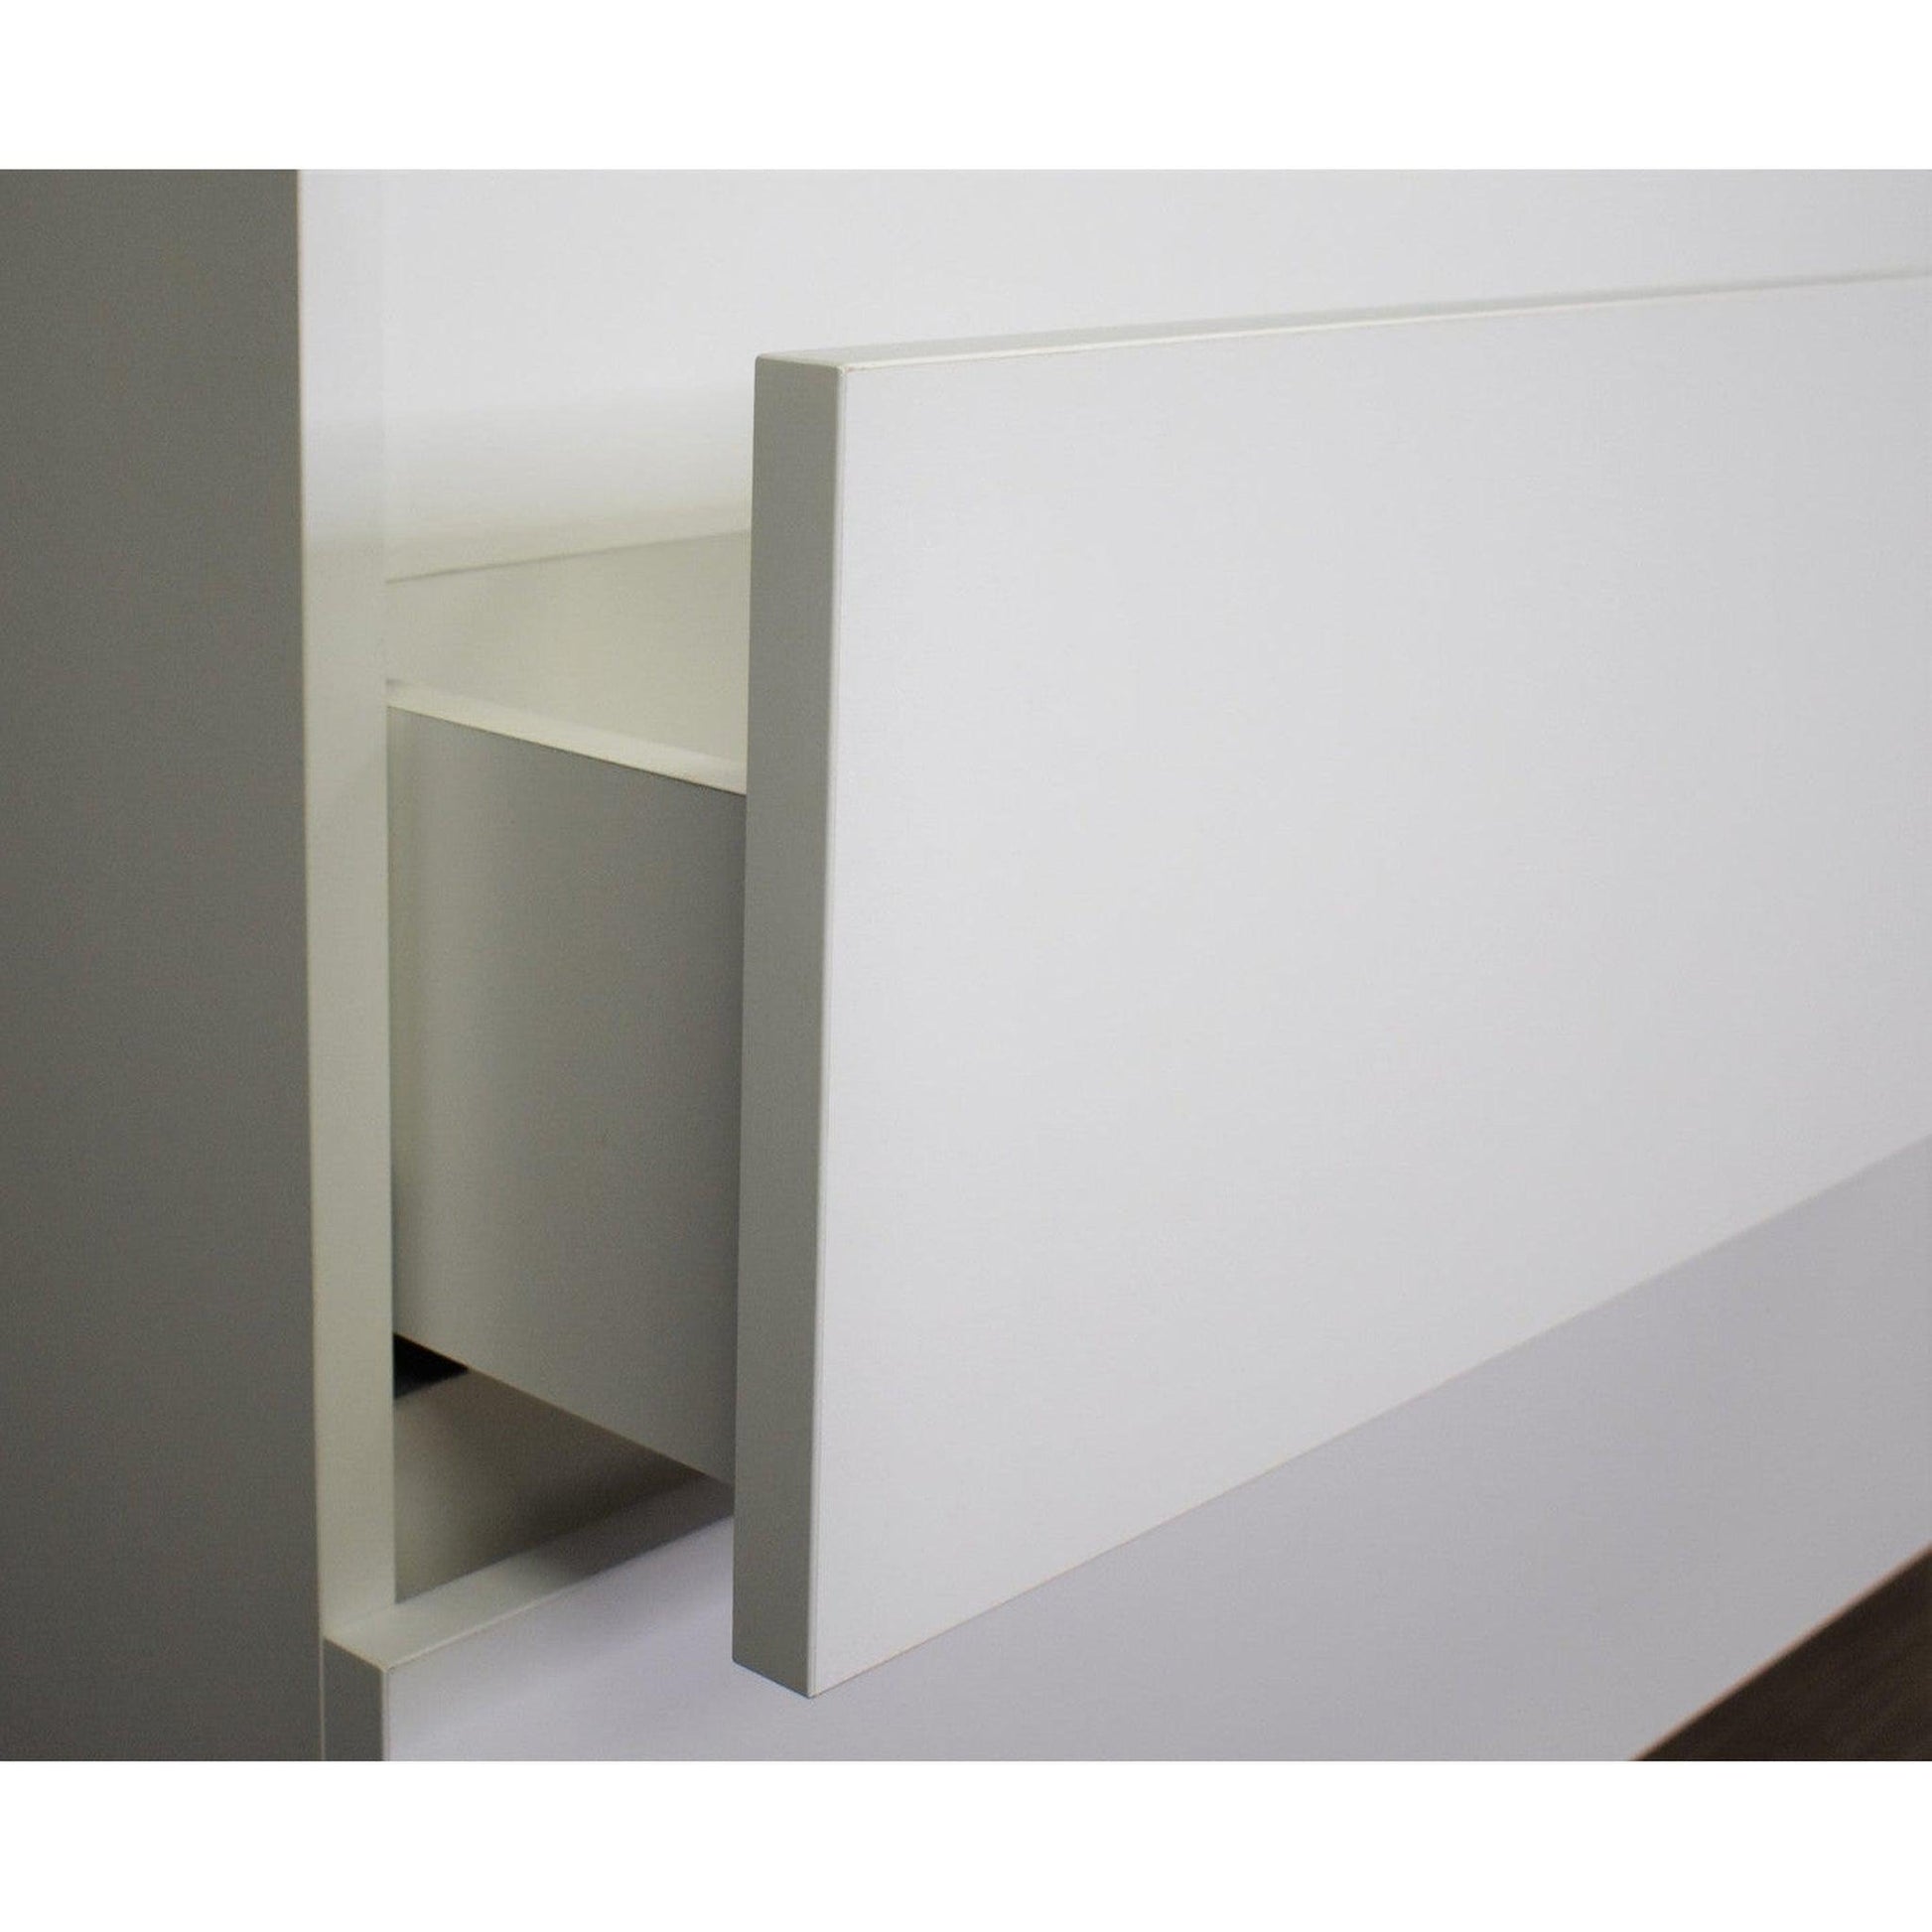 Volpa USA Salt 36" x 18" Glossy White Wall-Mounted Floating Bathroom Vanity Cabinet with Drawers